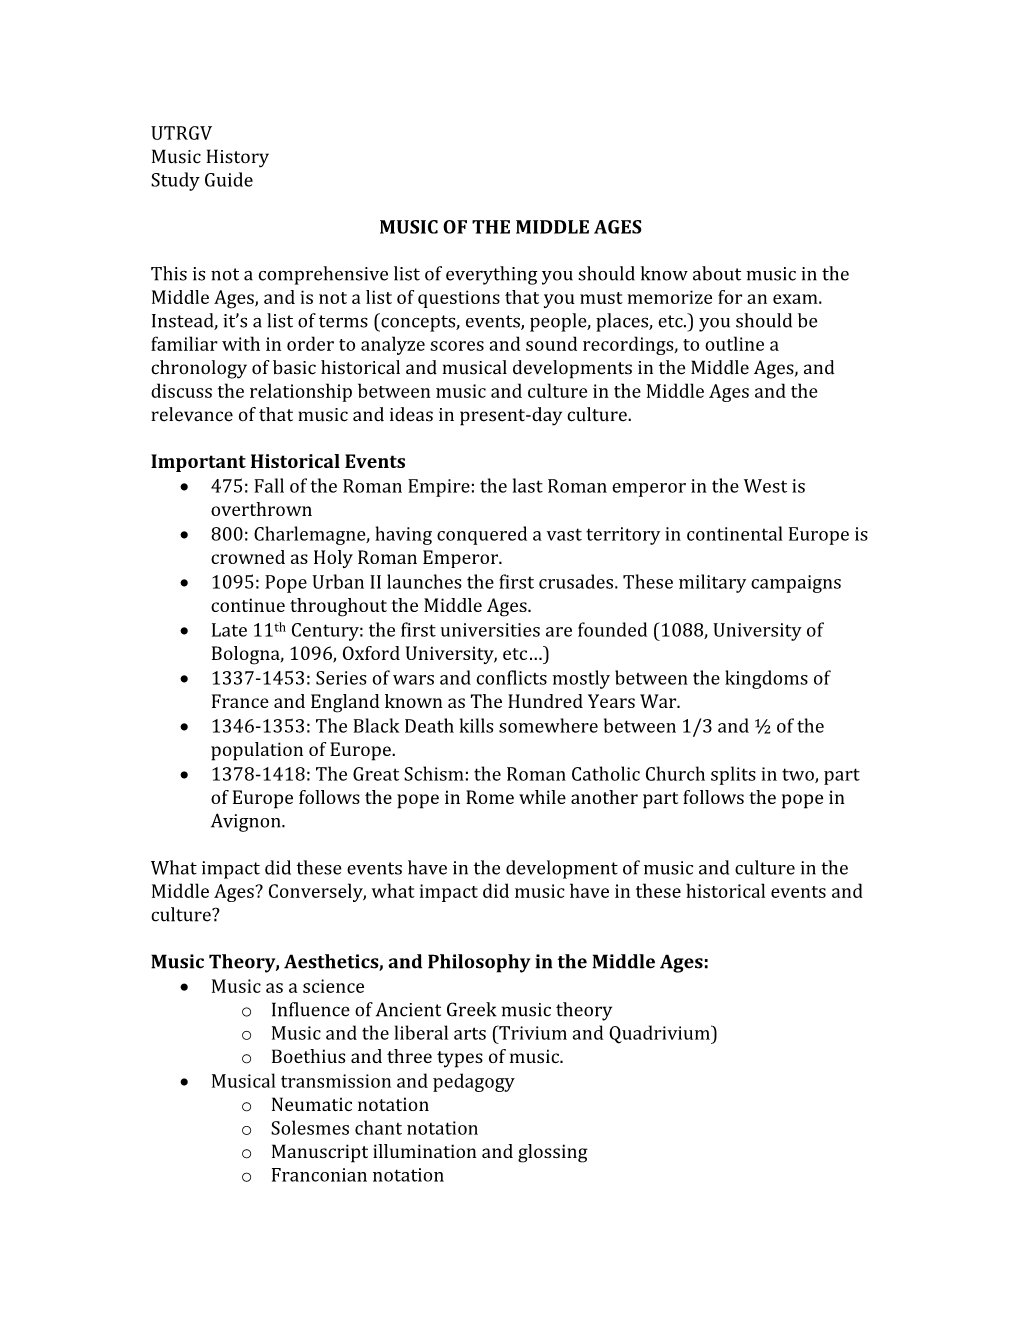 UTRGV Music History Study Guide MUSIC of the MIDDLE AGES